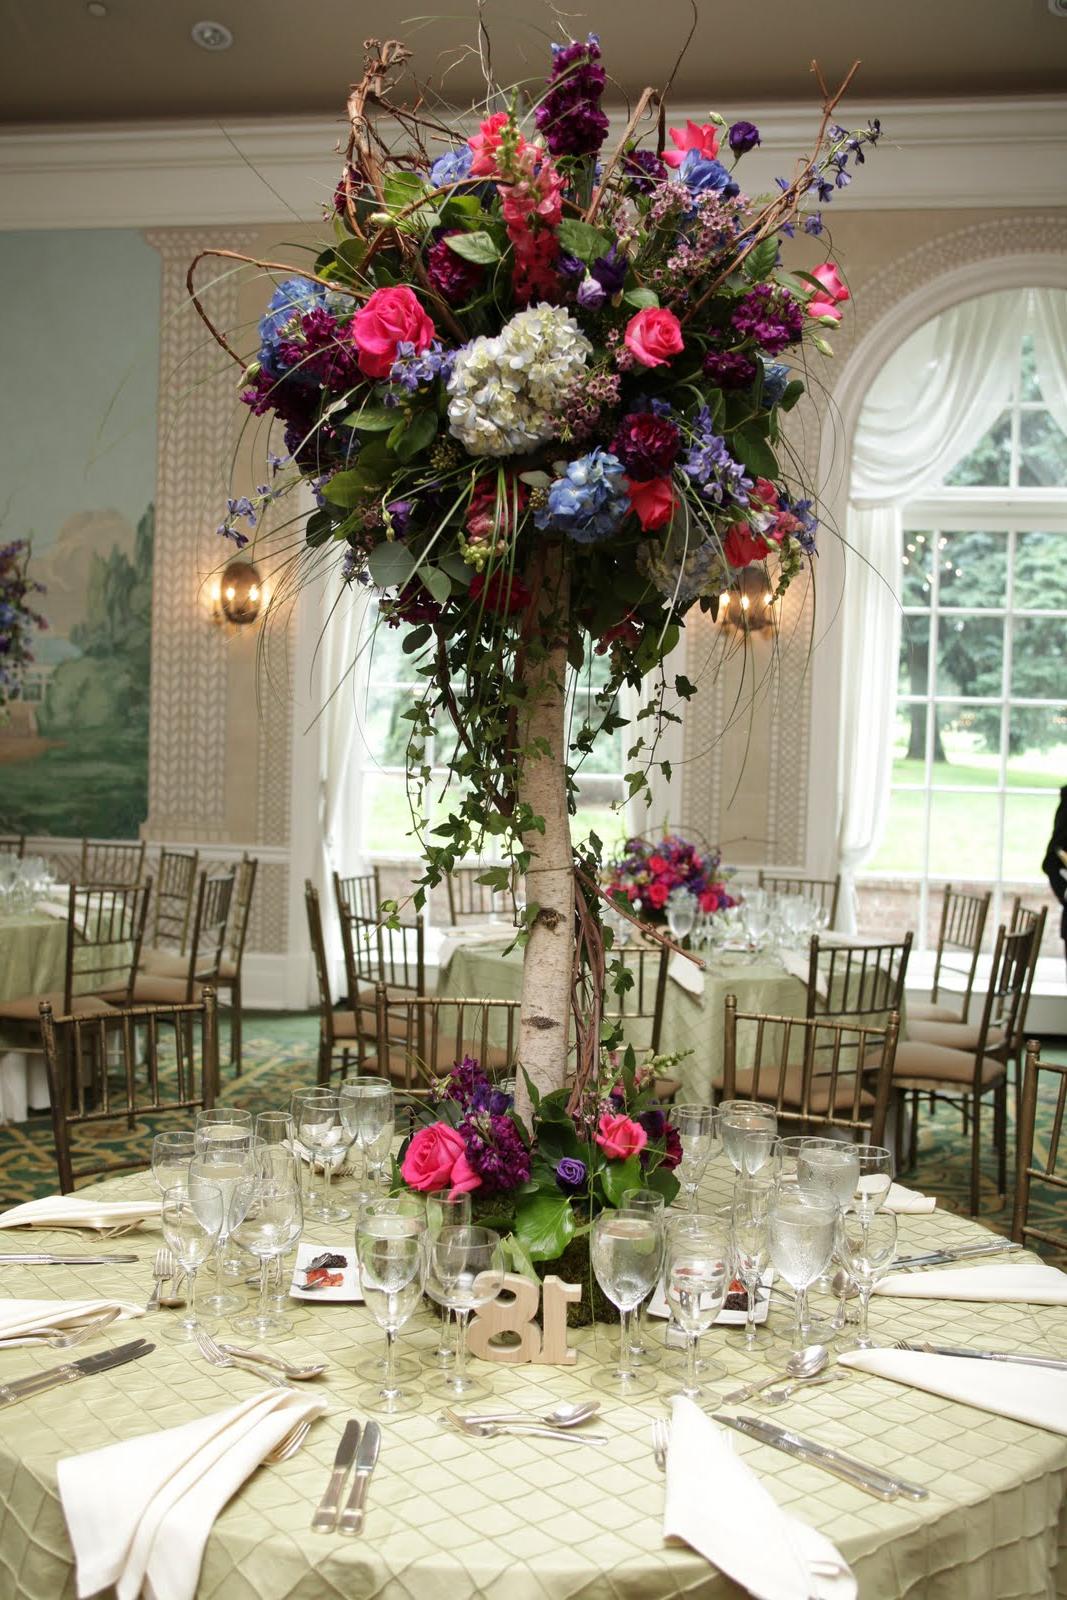 Tall centerpieces - and you